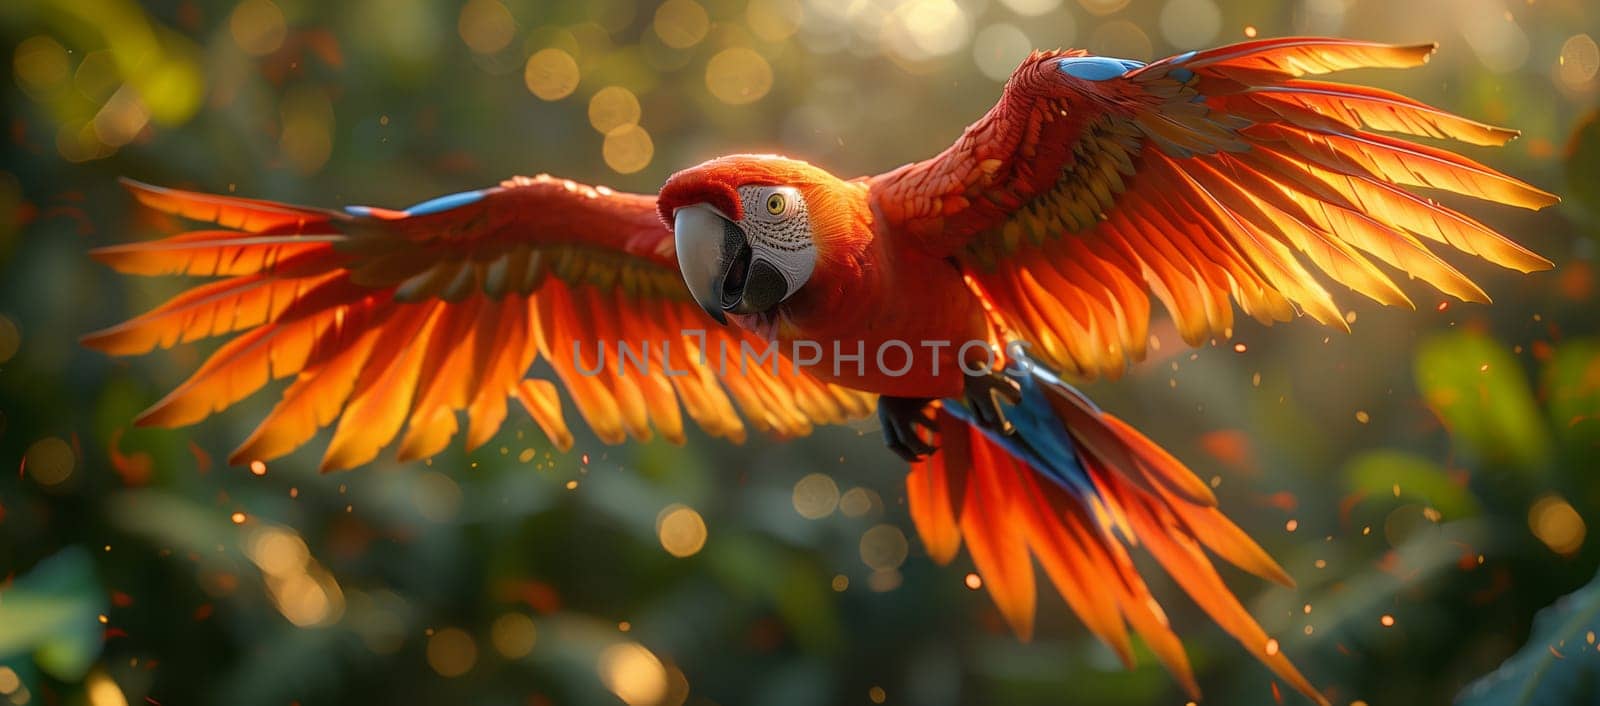 A red parrot with spread wings gracefully flies through the sky by richwolf